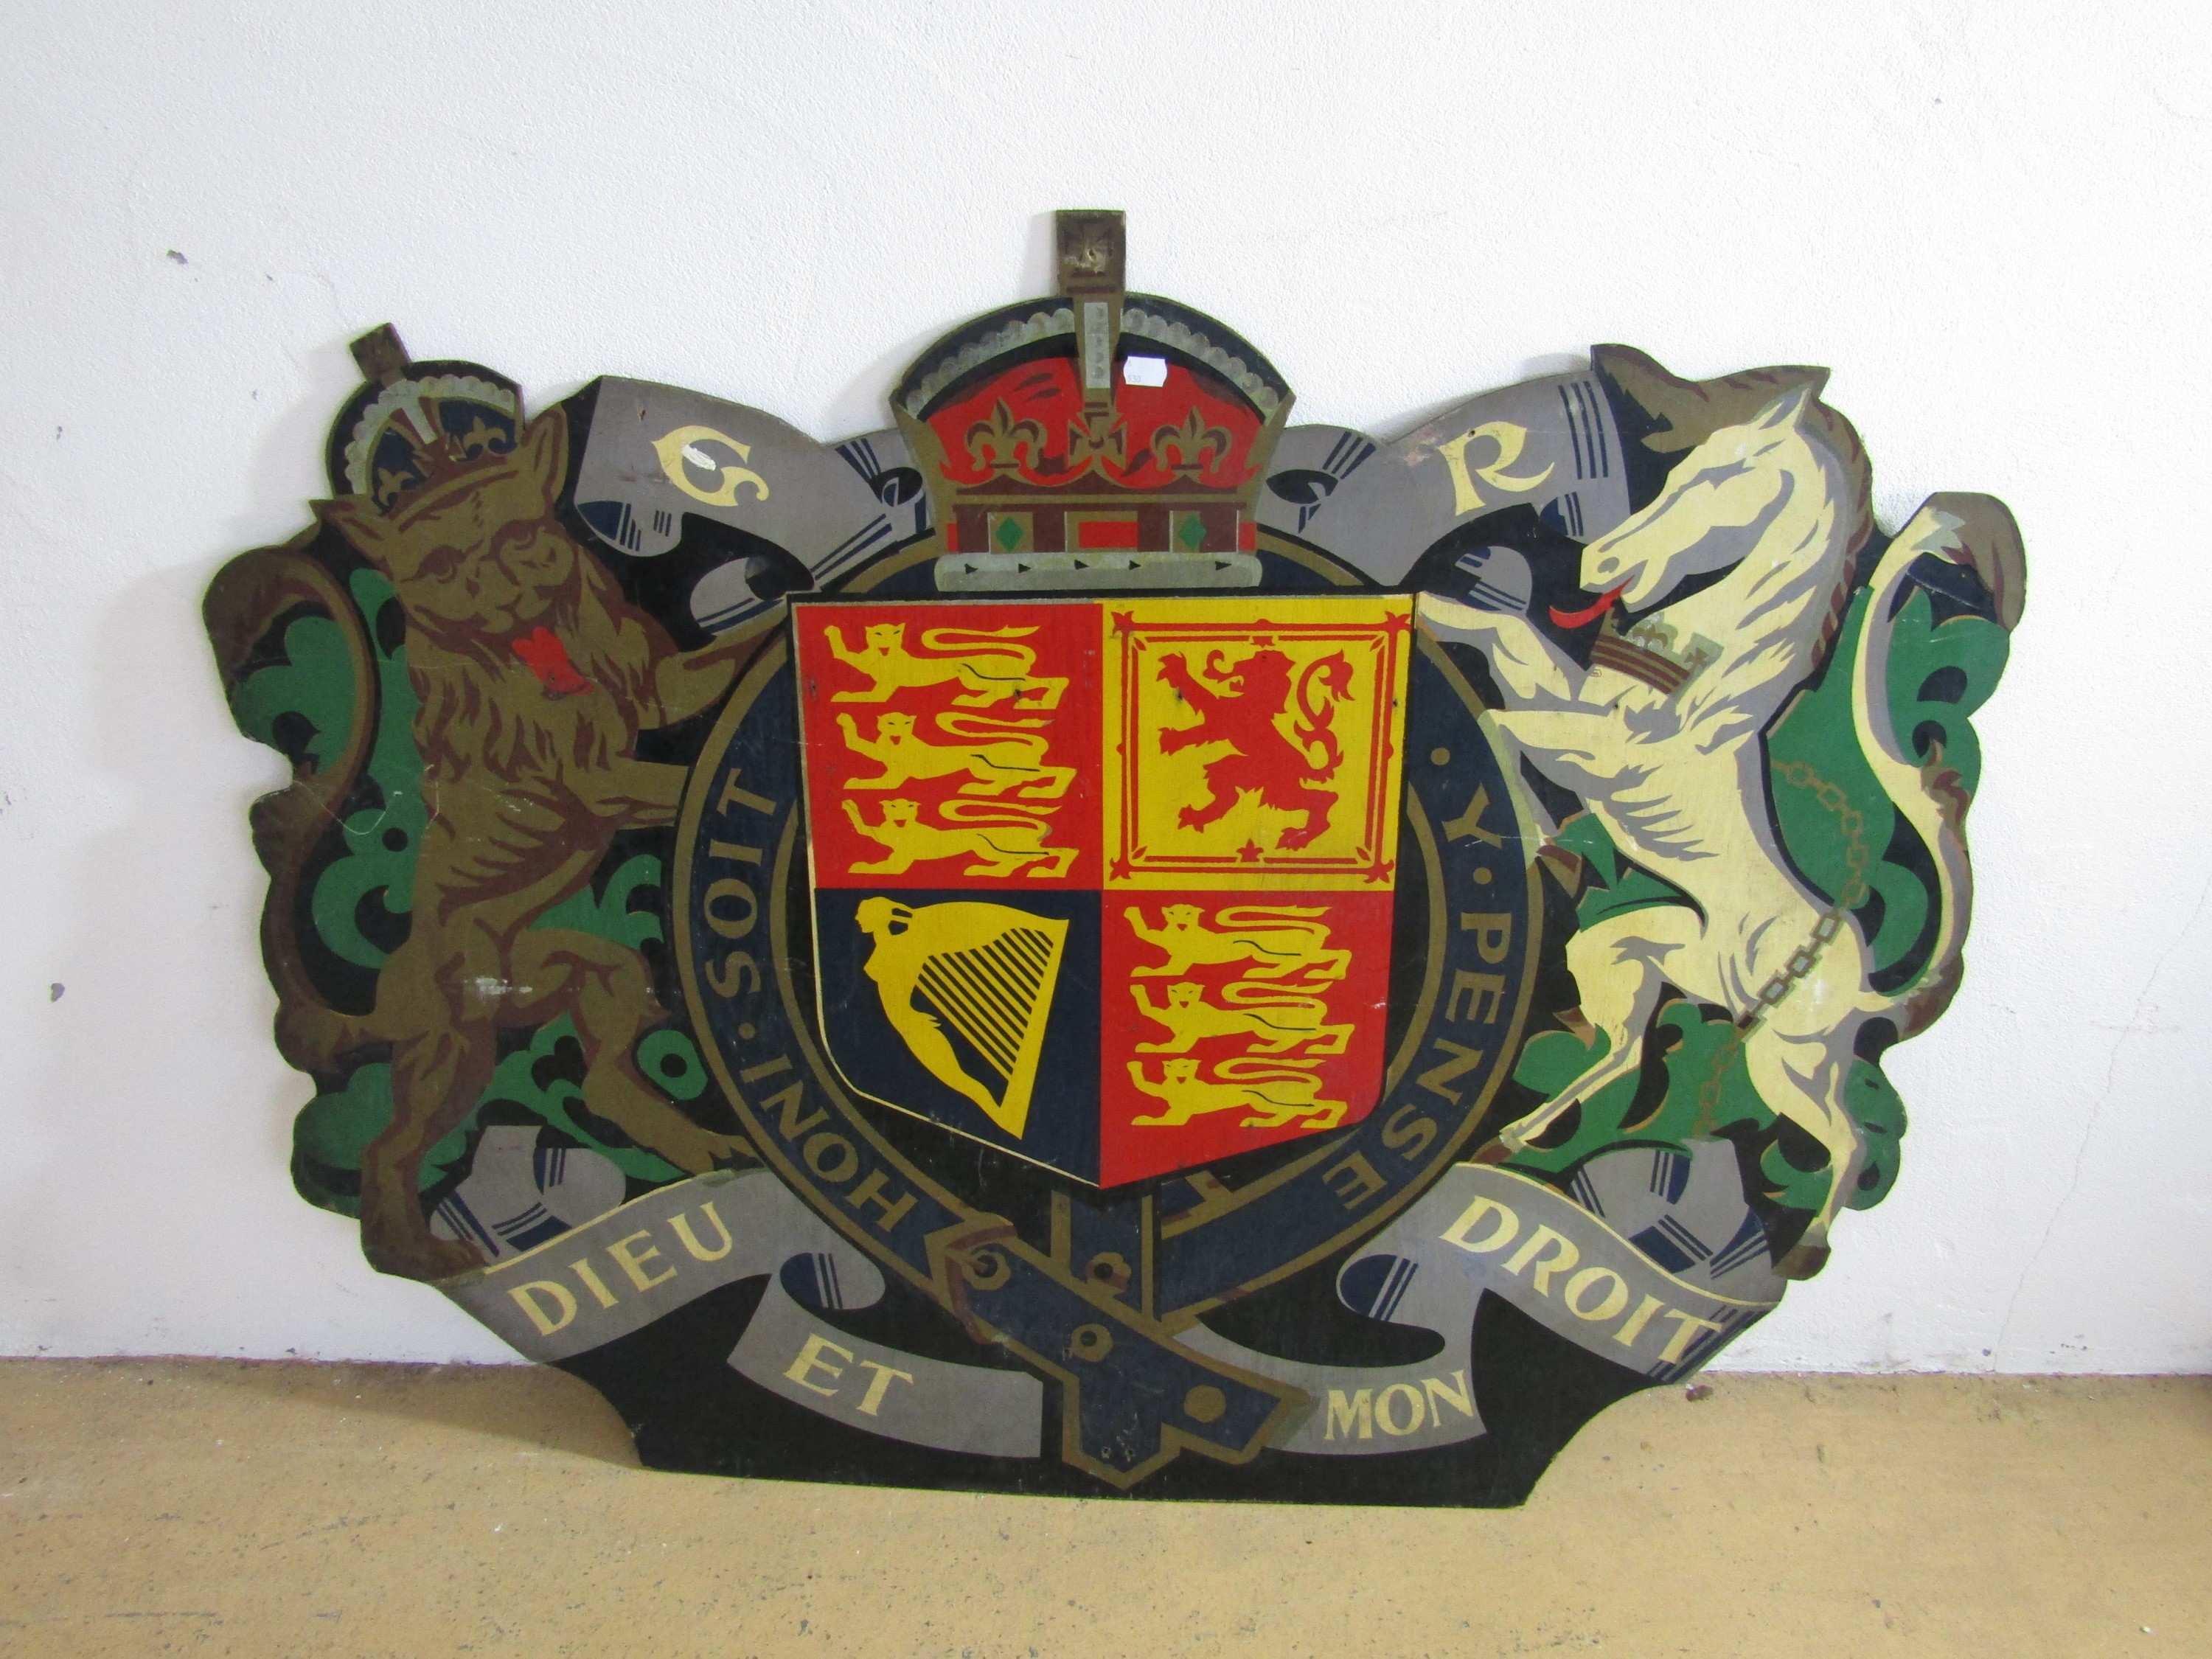 A large 1940s Royal coat of arms screen-printed on plywood, 91 cm high